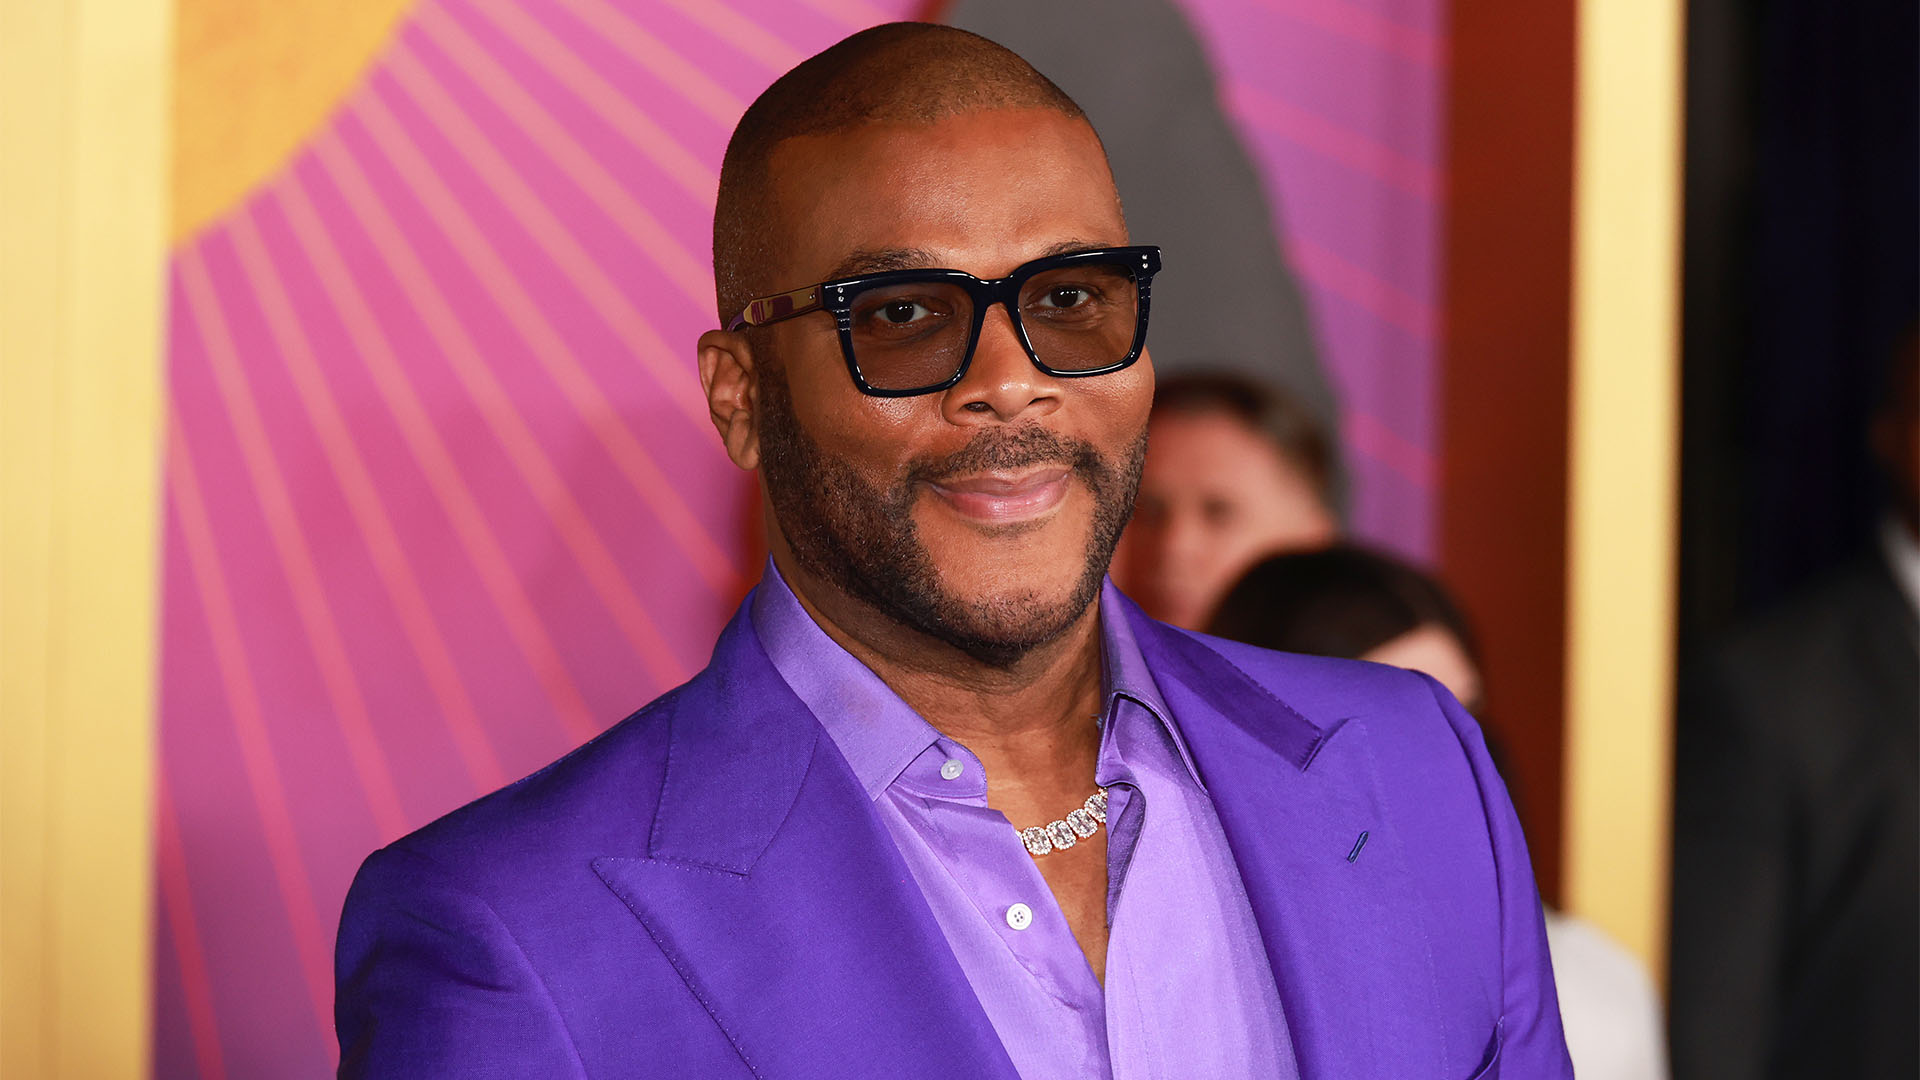 Tyler Perry Inks A Major First-Look Series Deal With Netflix To Continue Expanding The Reach Of Black Entertainment